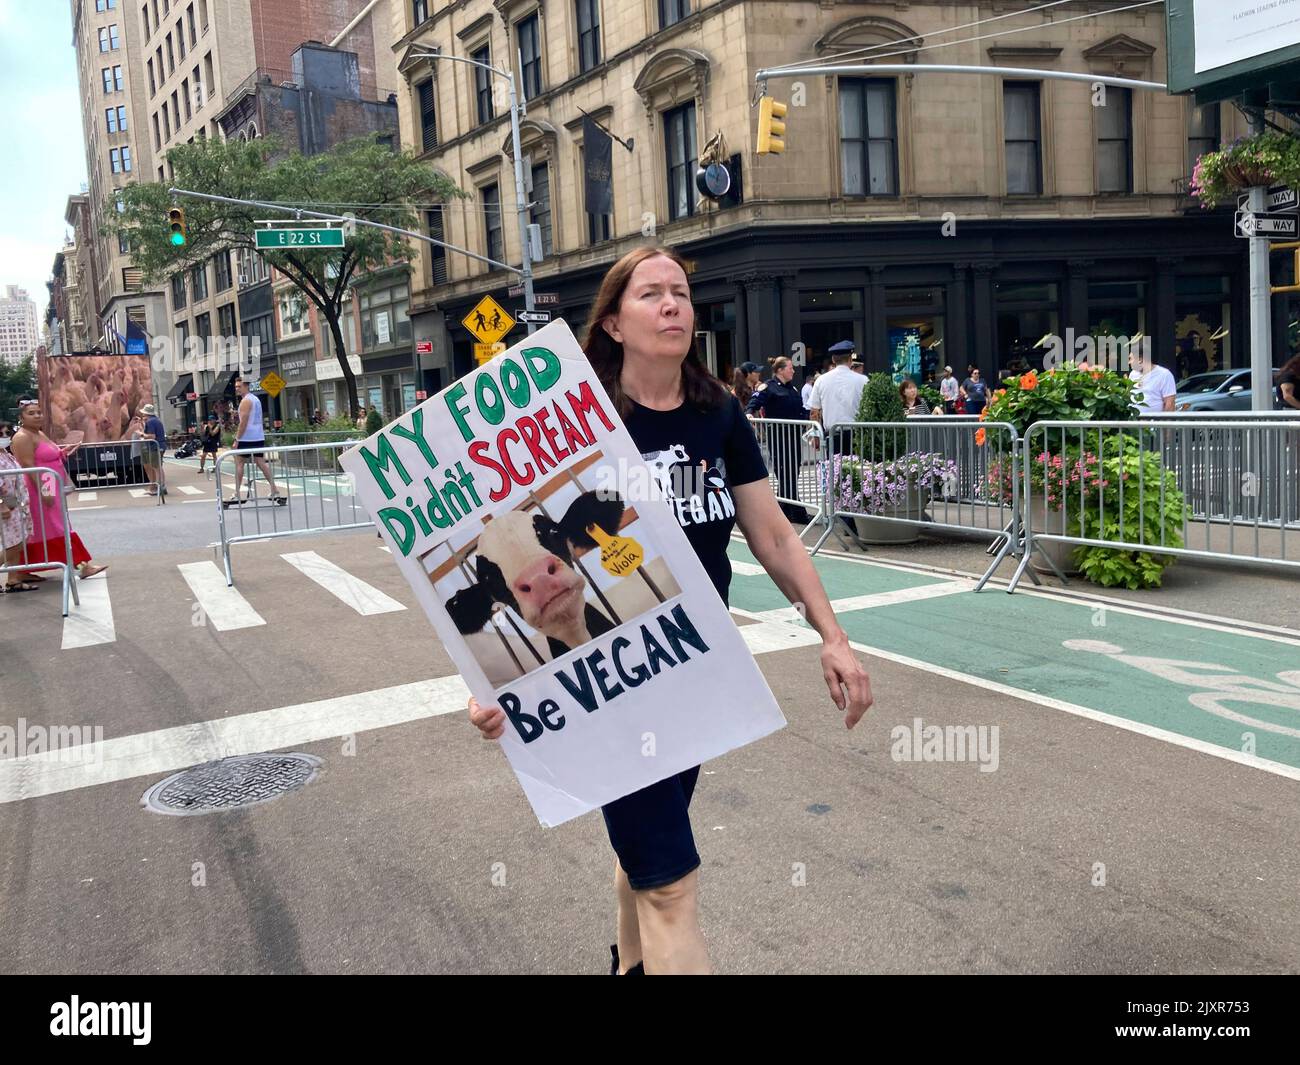 Animal Rights advocates, from anti-carriage horse activists to vegans, and everyone in between, gather in Flatiron Plaza in New york for the Animal Rights March on Saturday, August 27, 2021.  (© Frances M. roberts) Stock Photo